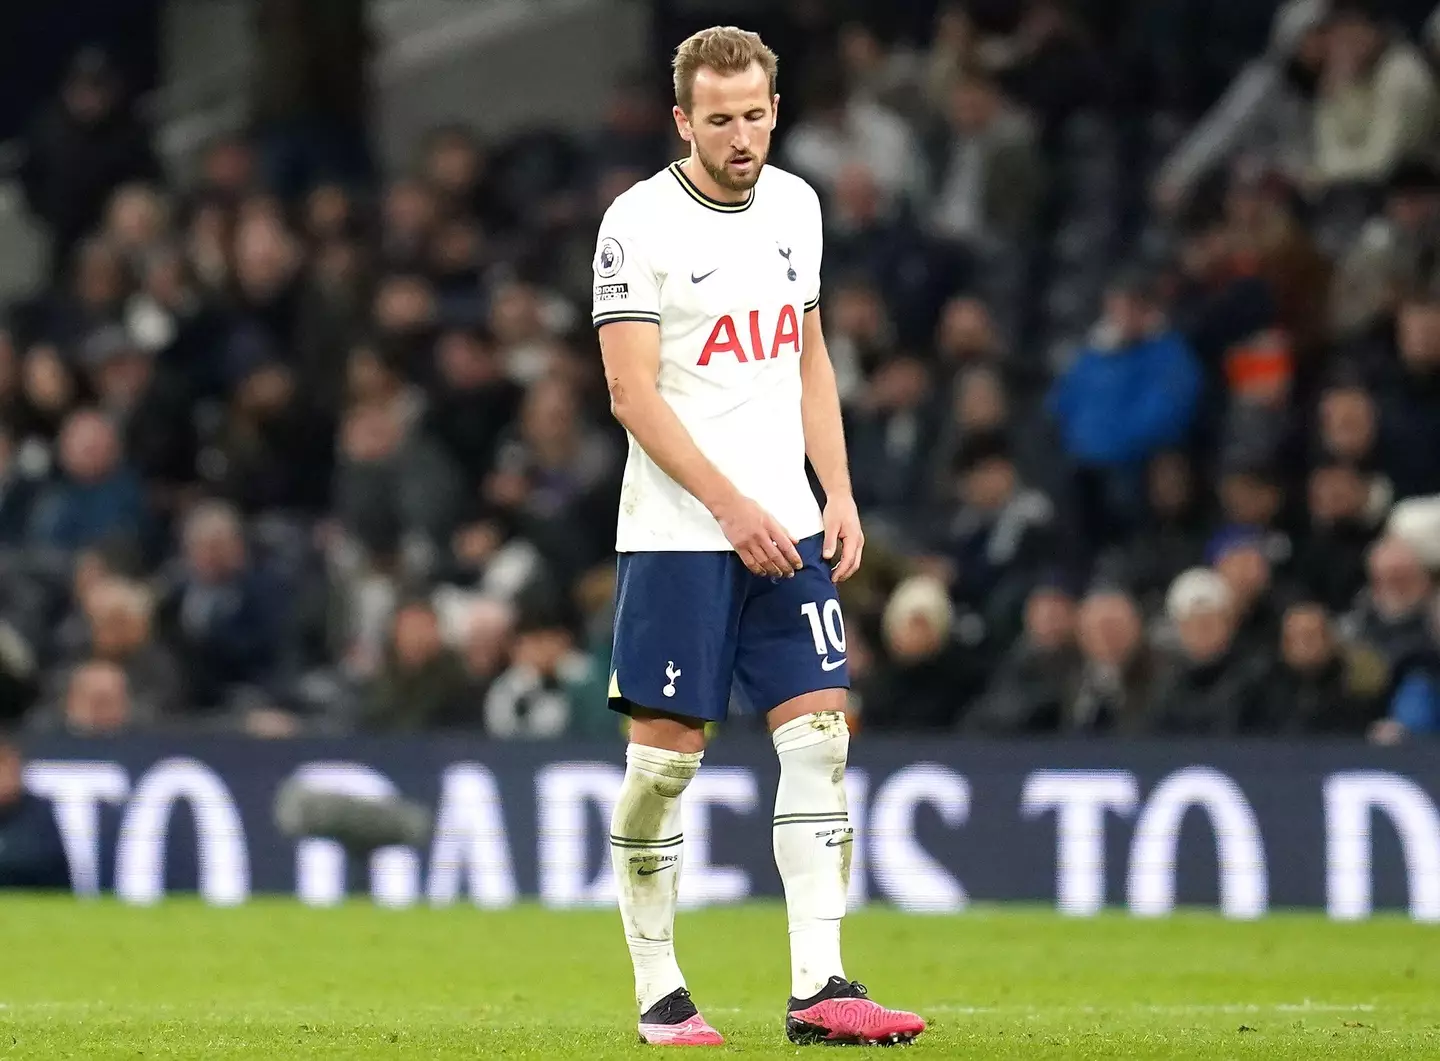 It's been a tough week for Spurs. Image: Alamy